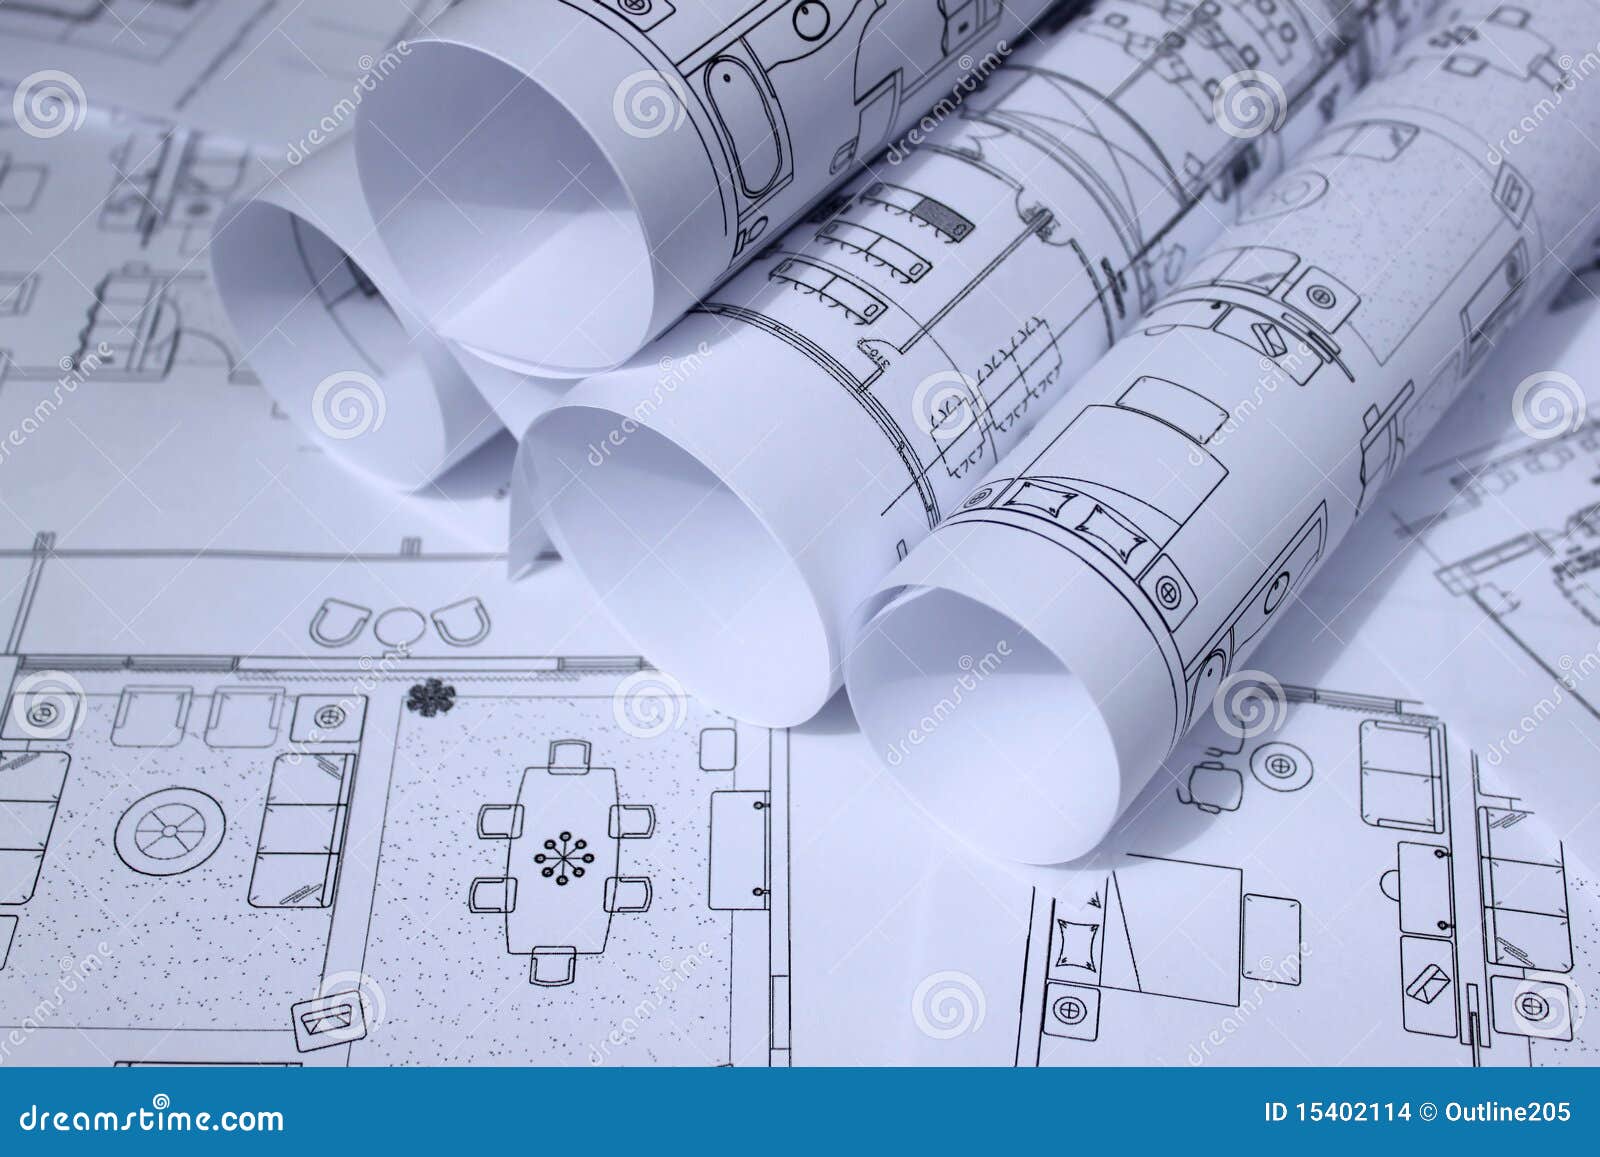 blueprints for home,office